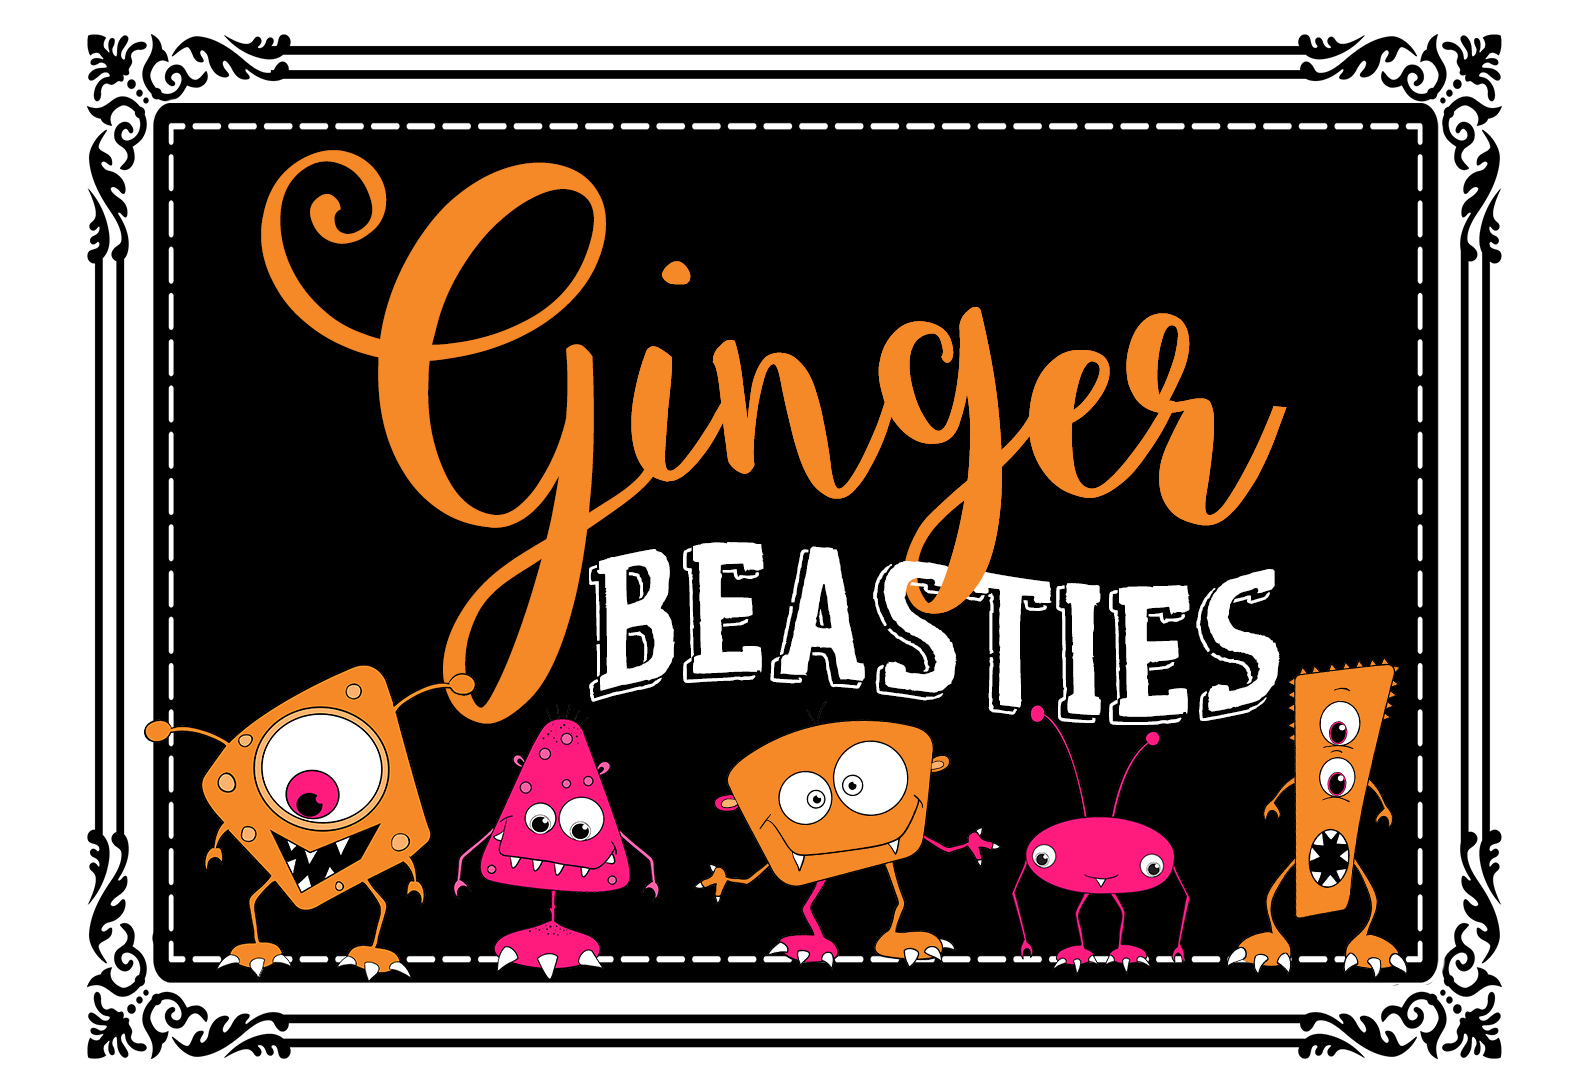 Ginger Beasties logo -monsters and name on black background with a frame